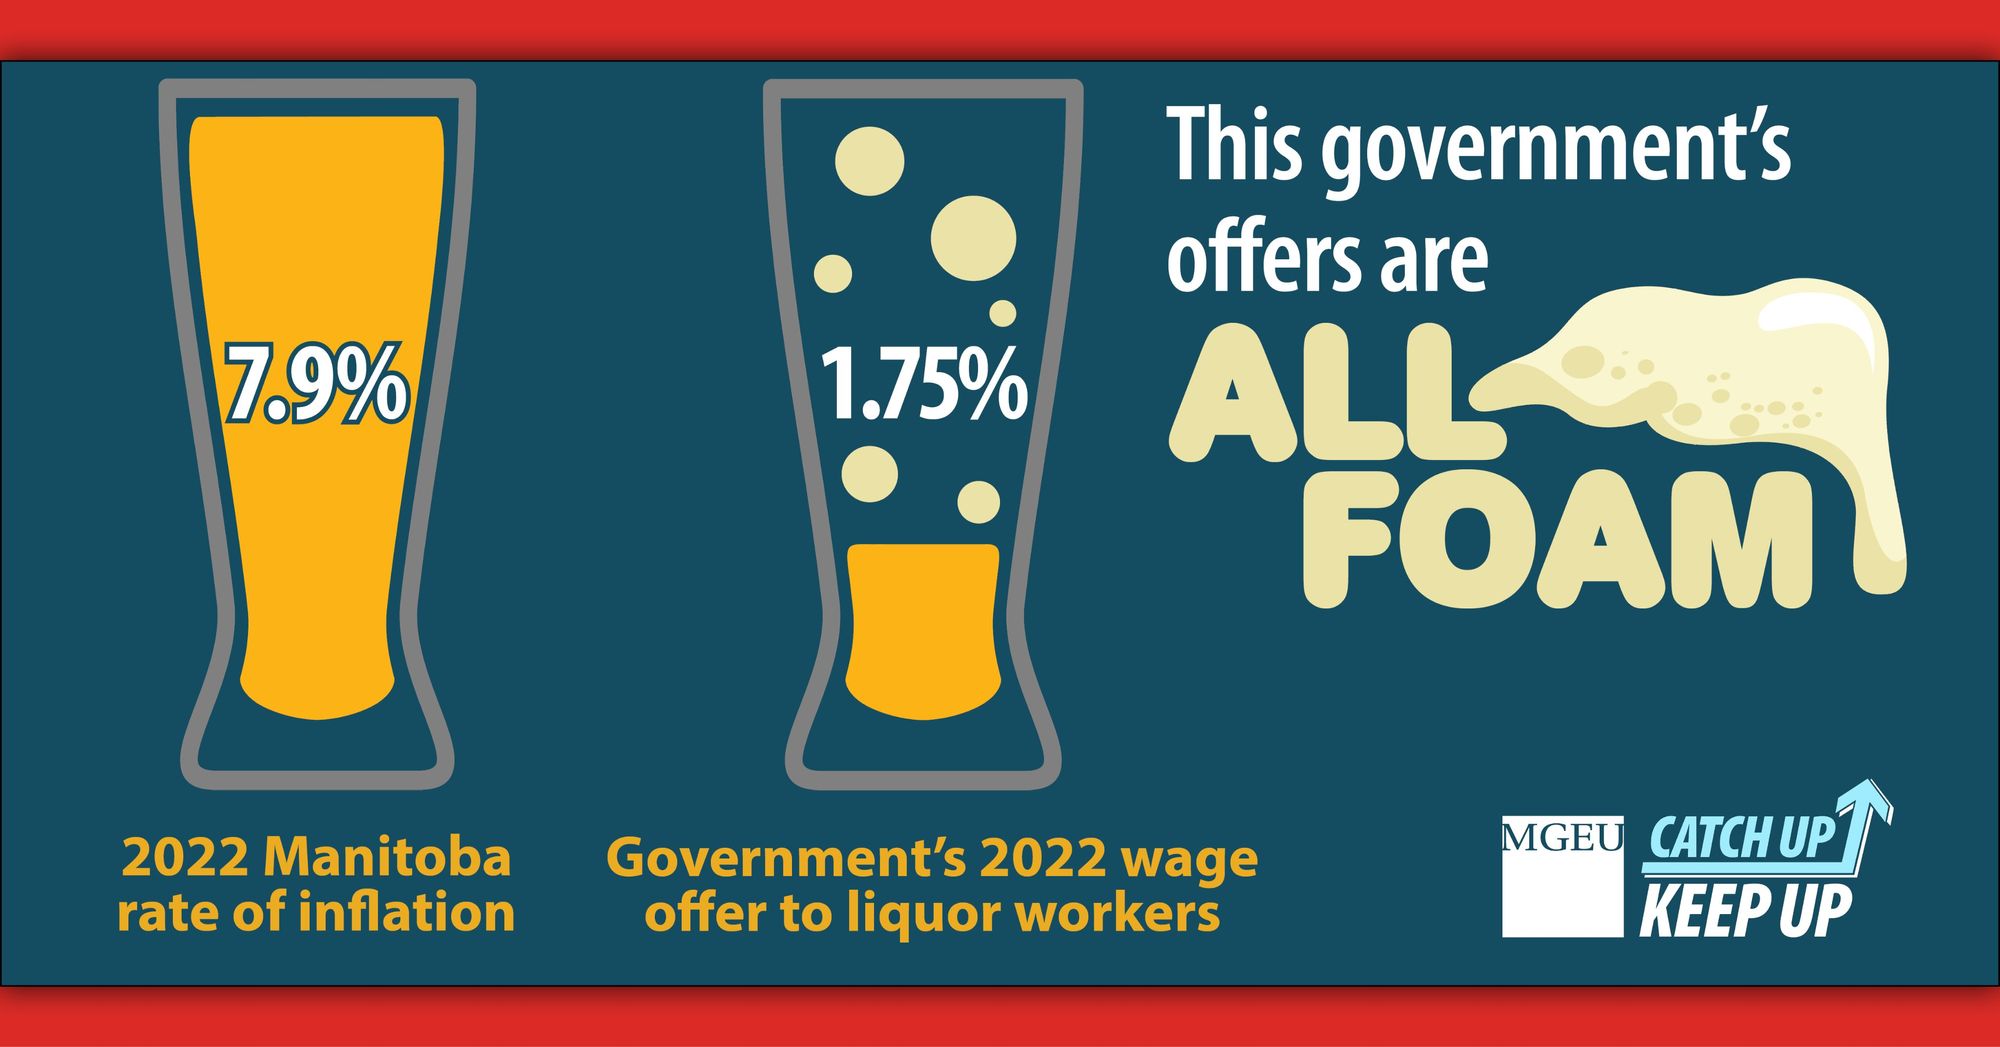 Manitoba Liquor Workers Defeated Government And Their Employer